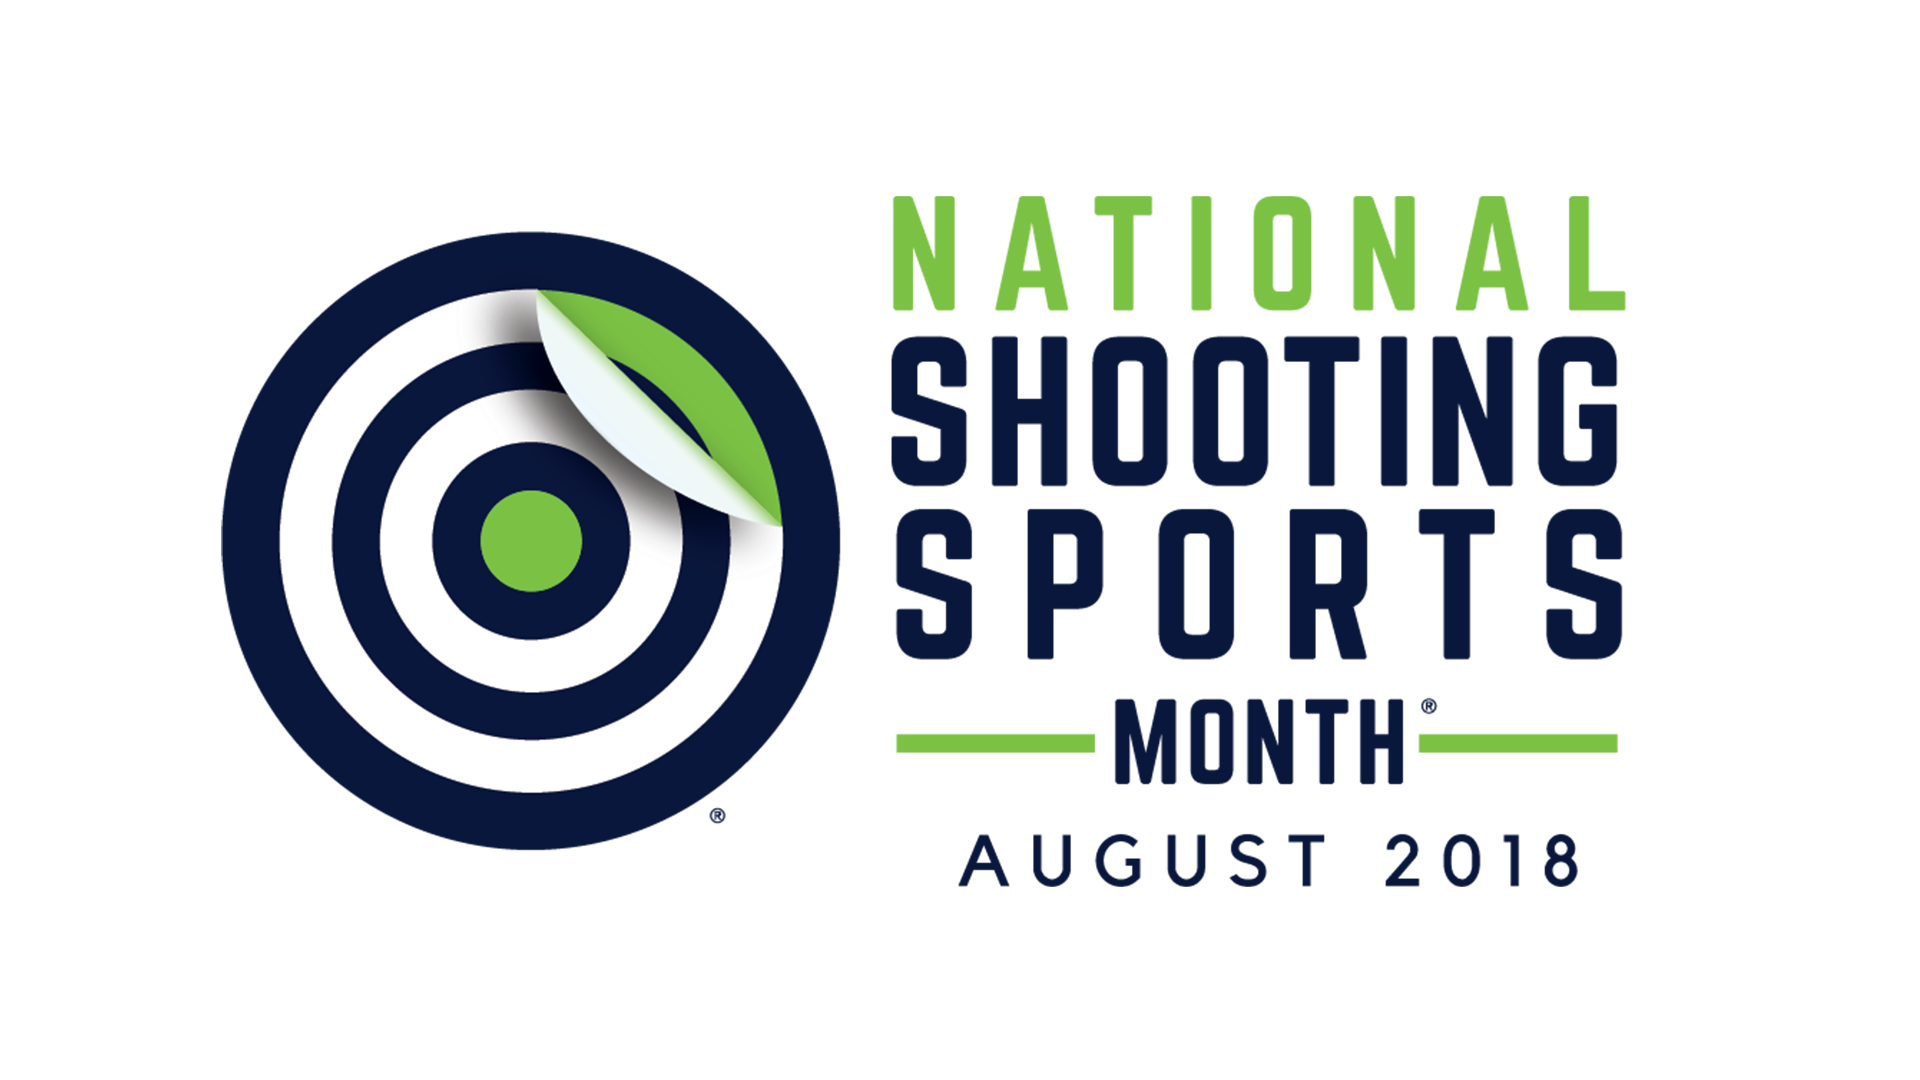 National Shooting Sport Month and Trigger Sweepstakes